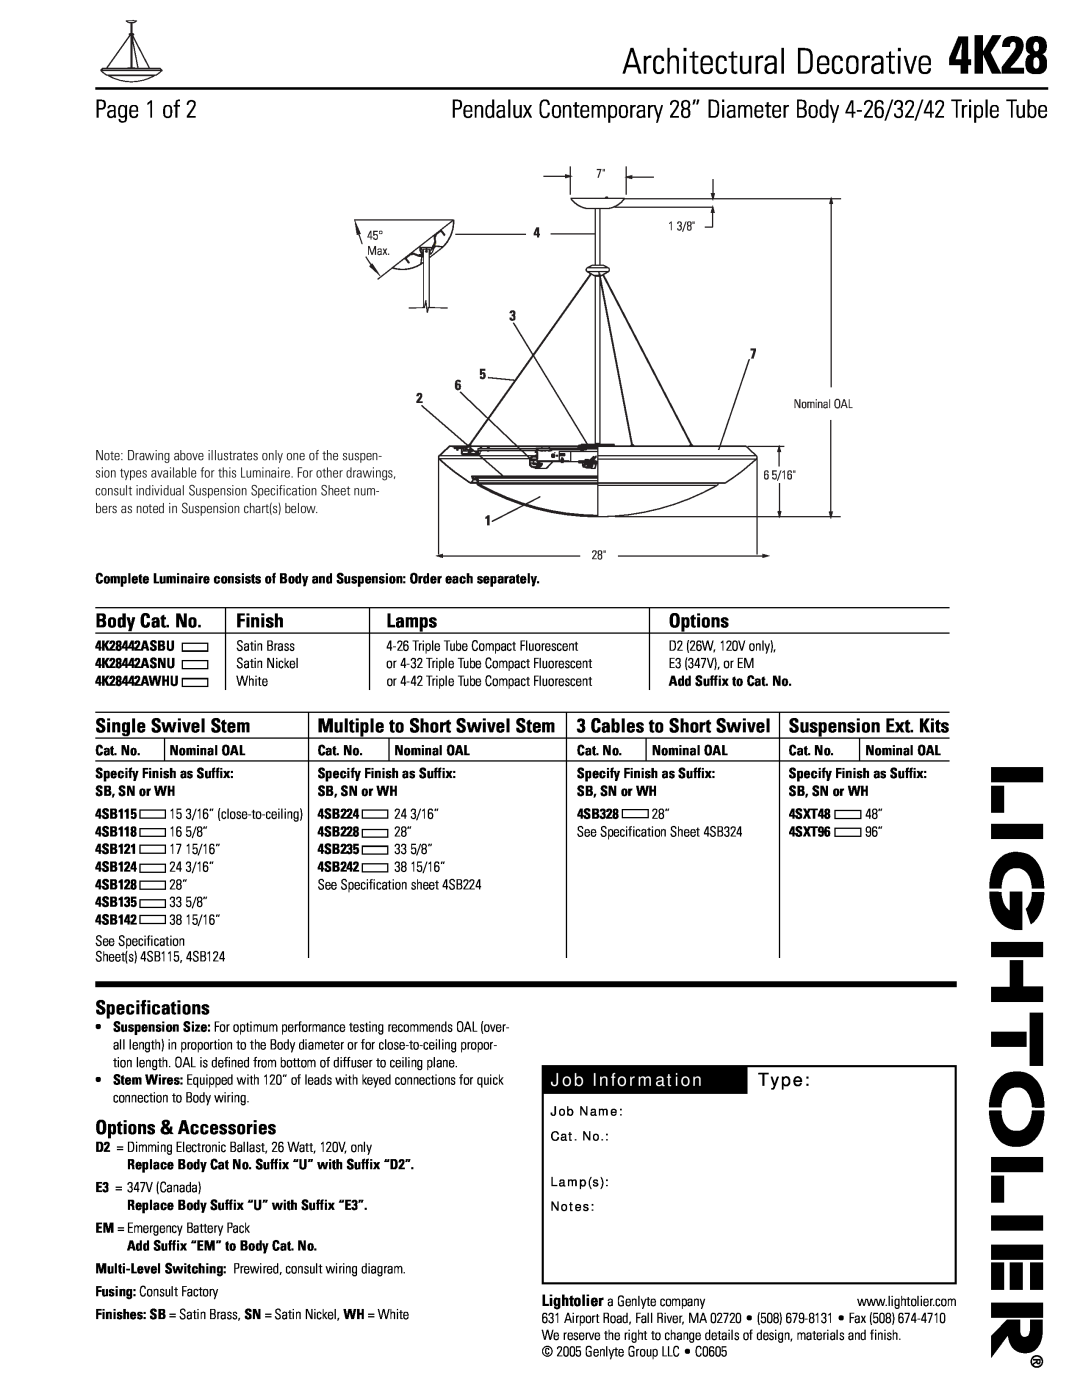 Lightolier specifications Architectural Decorative 4K28, Page 1 of, Body Cat. No, Finish, Lamps, Options, Type 